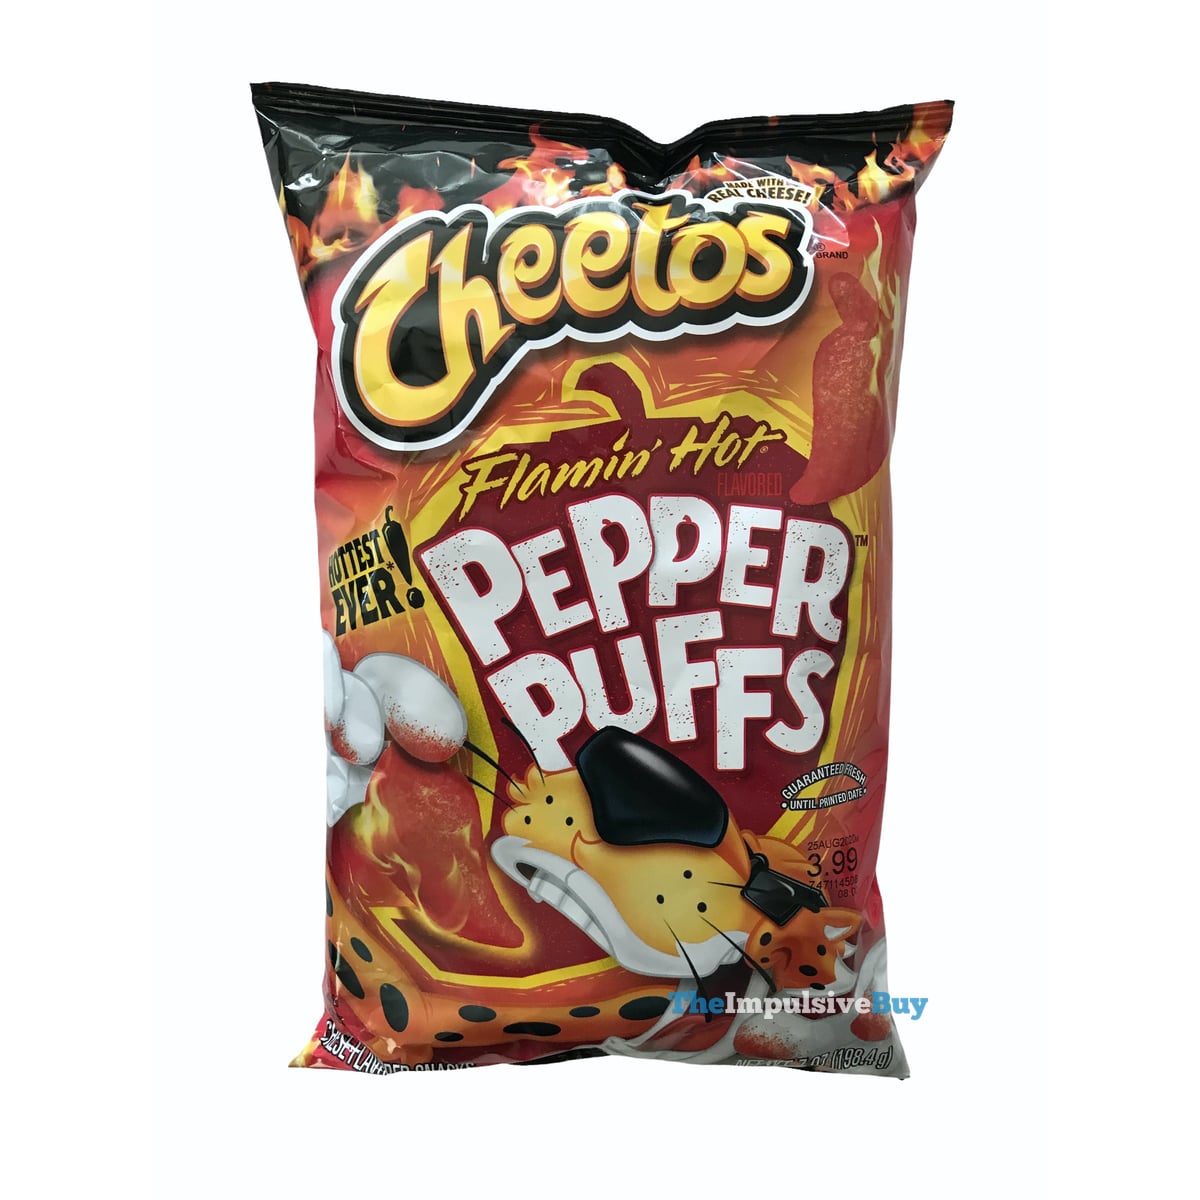 Which Flamin' Hot Cheetos Is The HOTTEST Of Them ALL? 